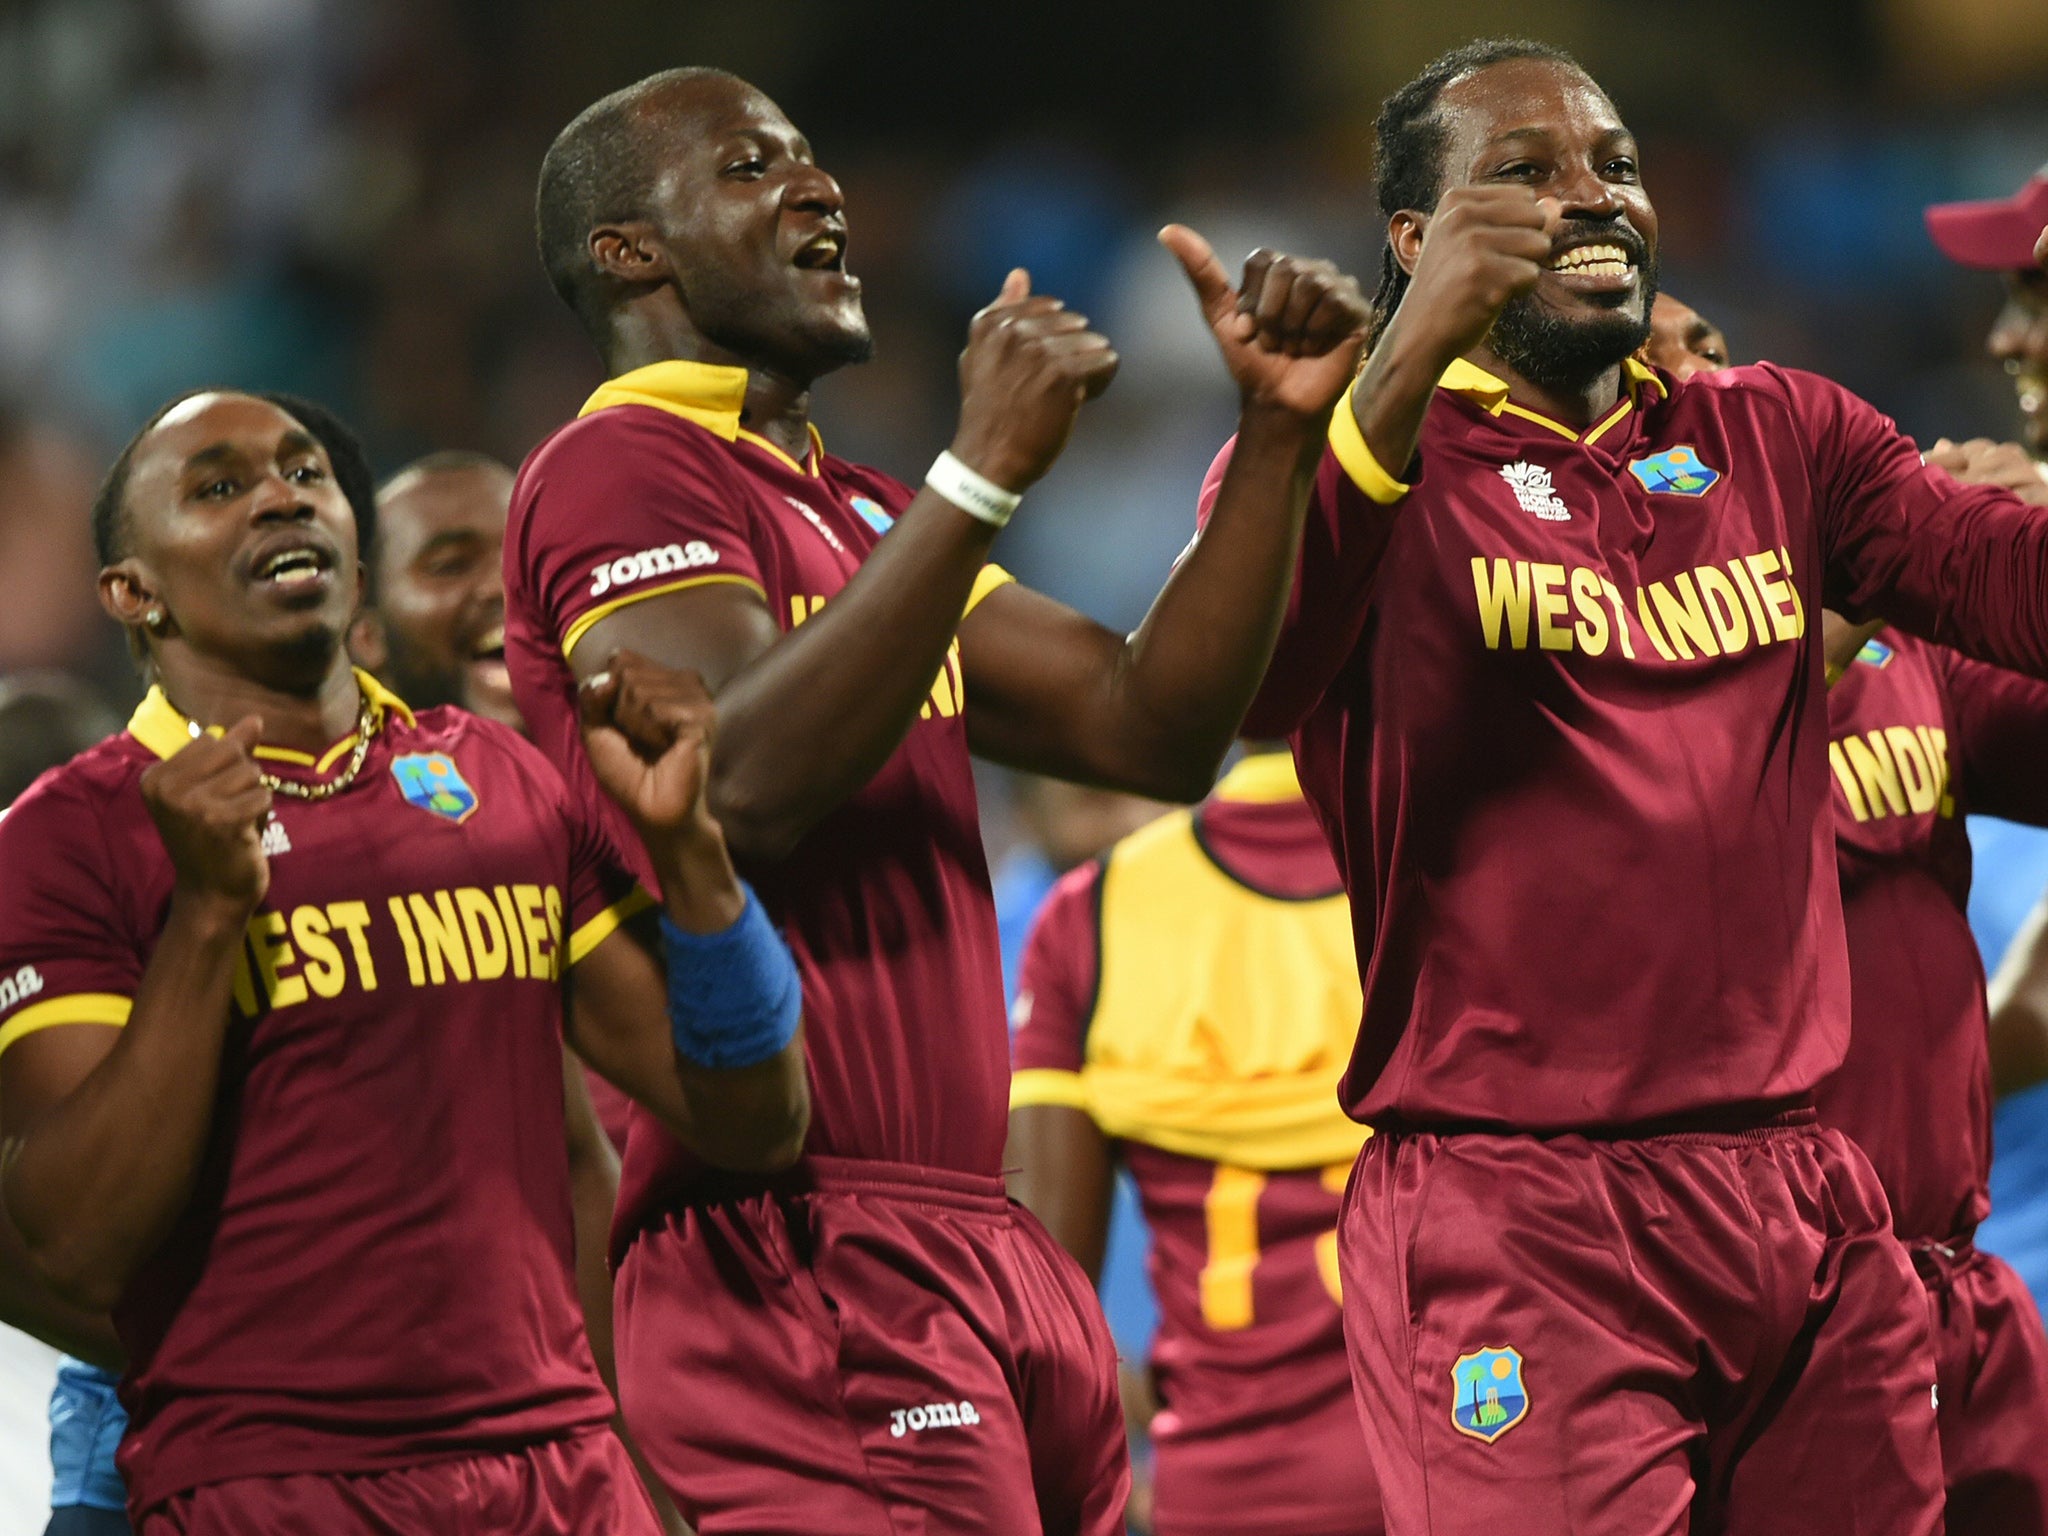 West Indies's captain Darren Sammy, Dwayne Bravo and Chris Gayle celebrate victory in the World T20 semi-final